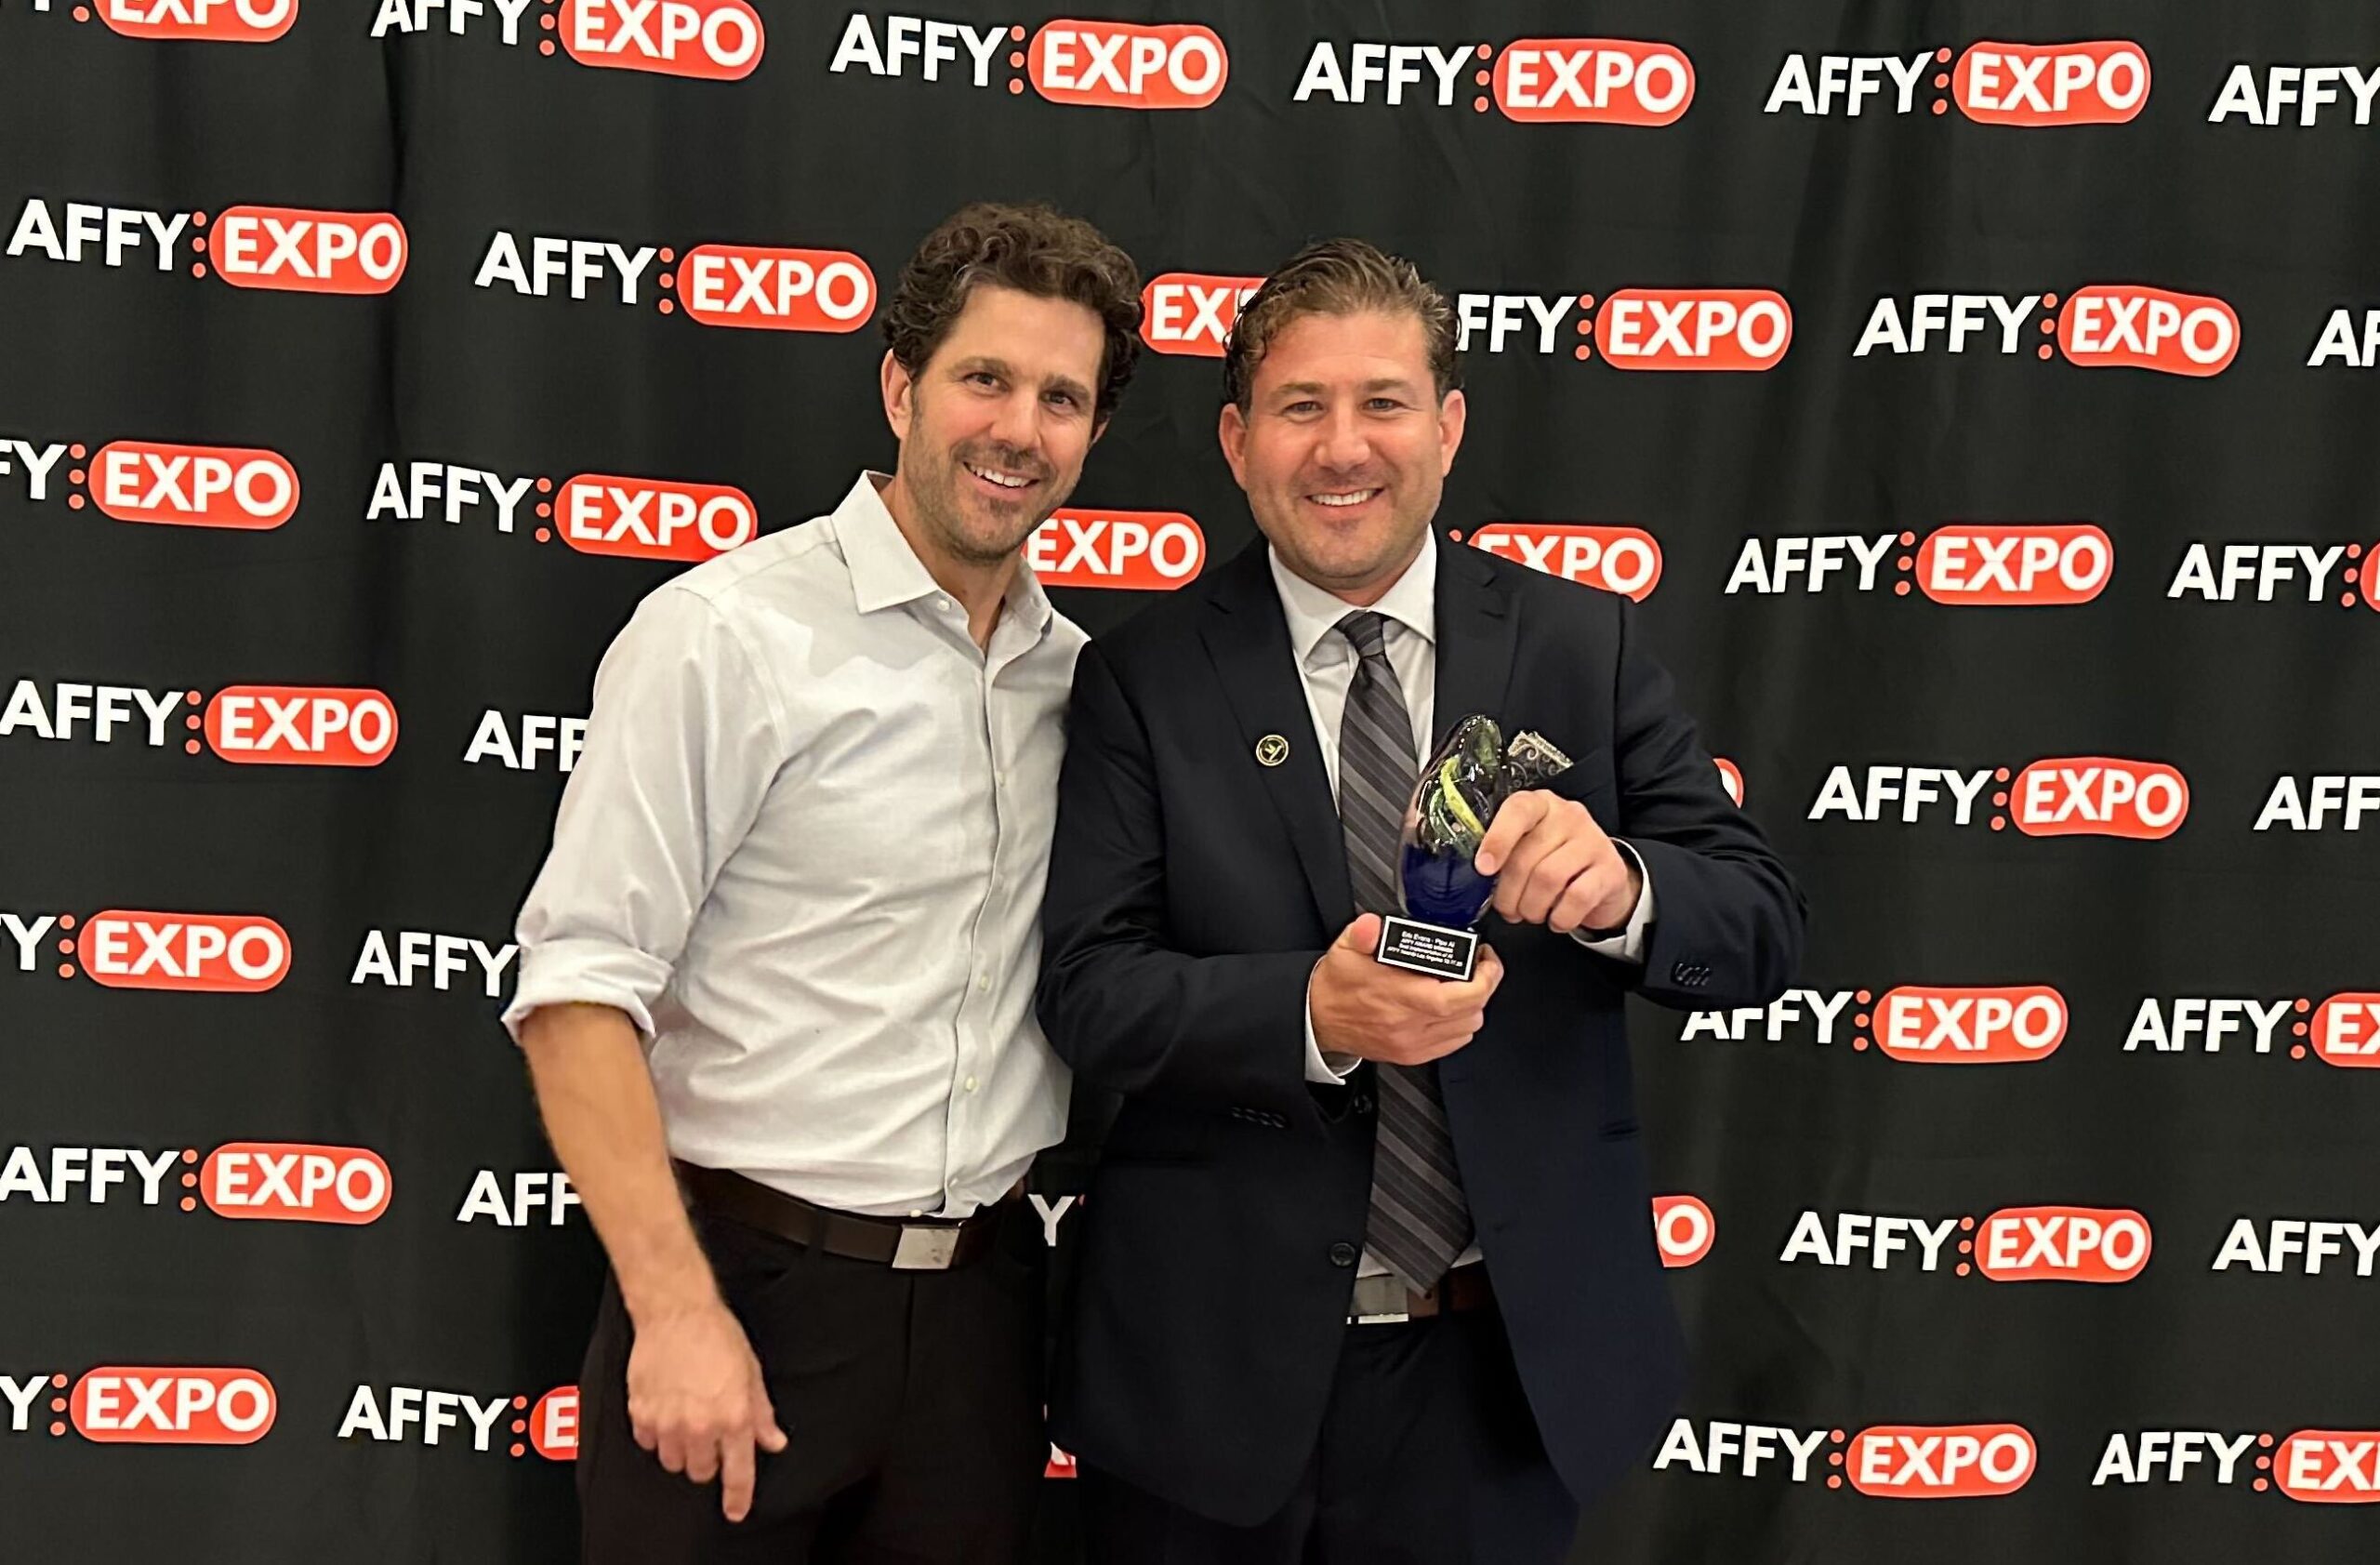 Pipes.ai receives 2023 AFFY Award for “Best Implementation of AI” Use AI technology to turn web leads into live calls for your sales team.